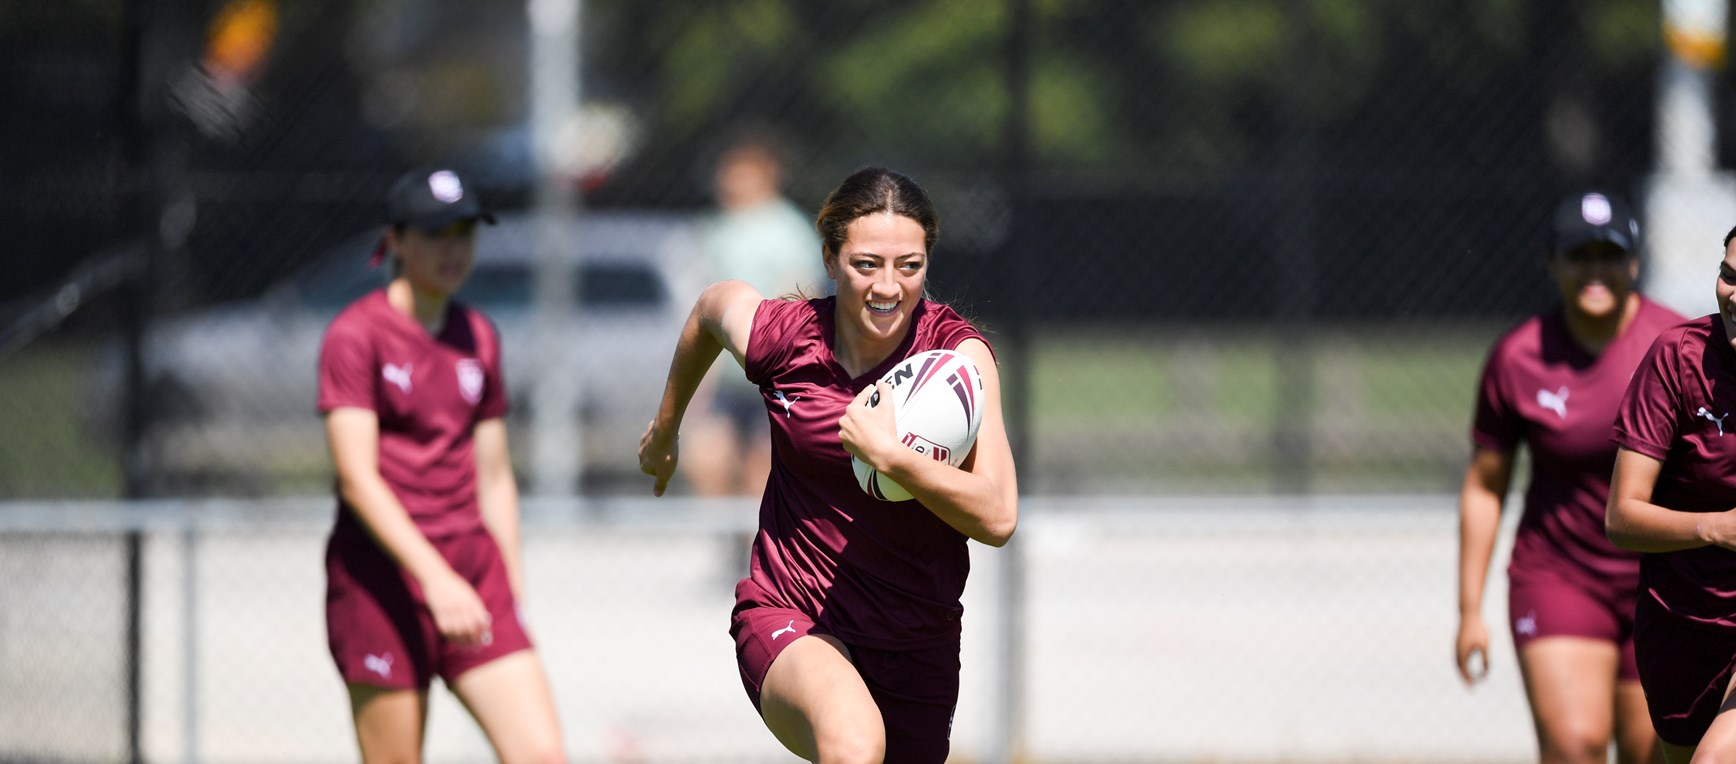 In pictures: Prep starts for Under 17 City and Country girls